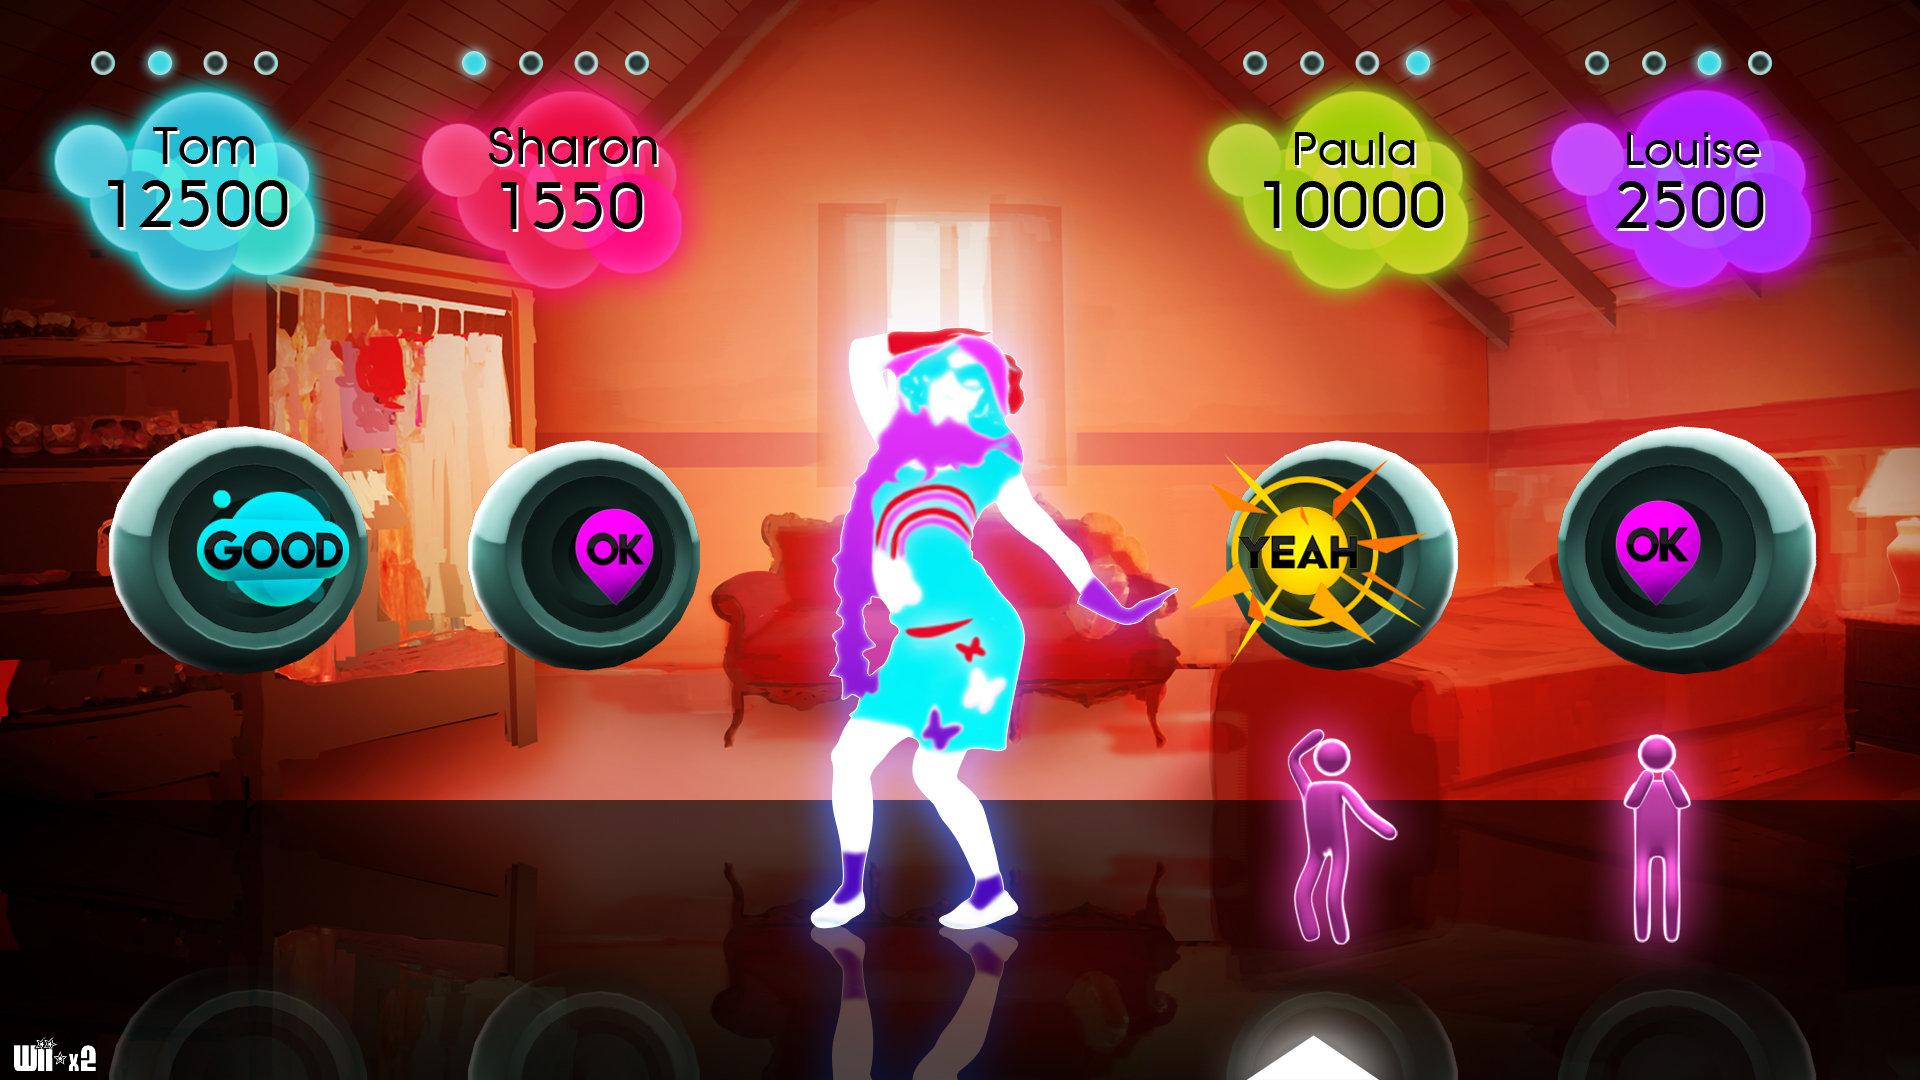 Screenshots of Just Dance 2 for Wii